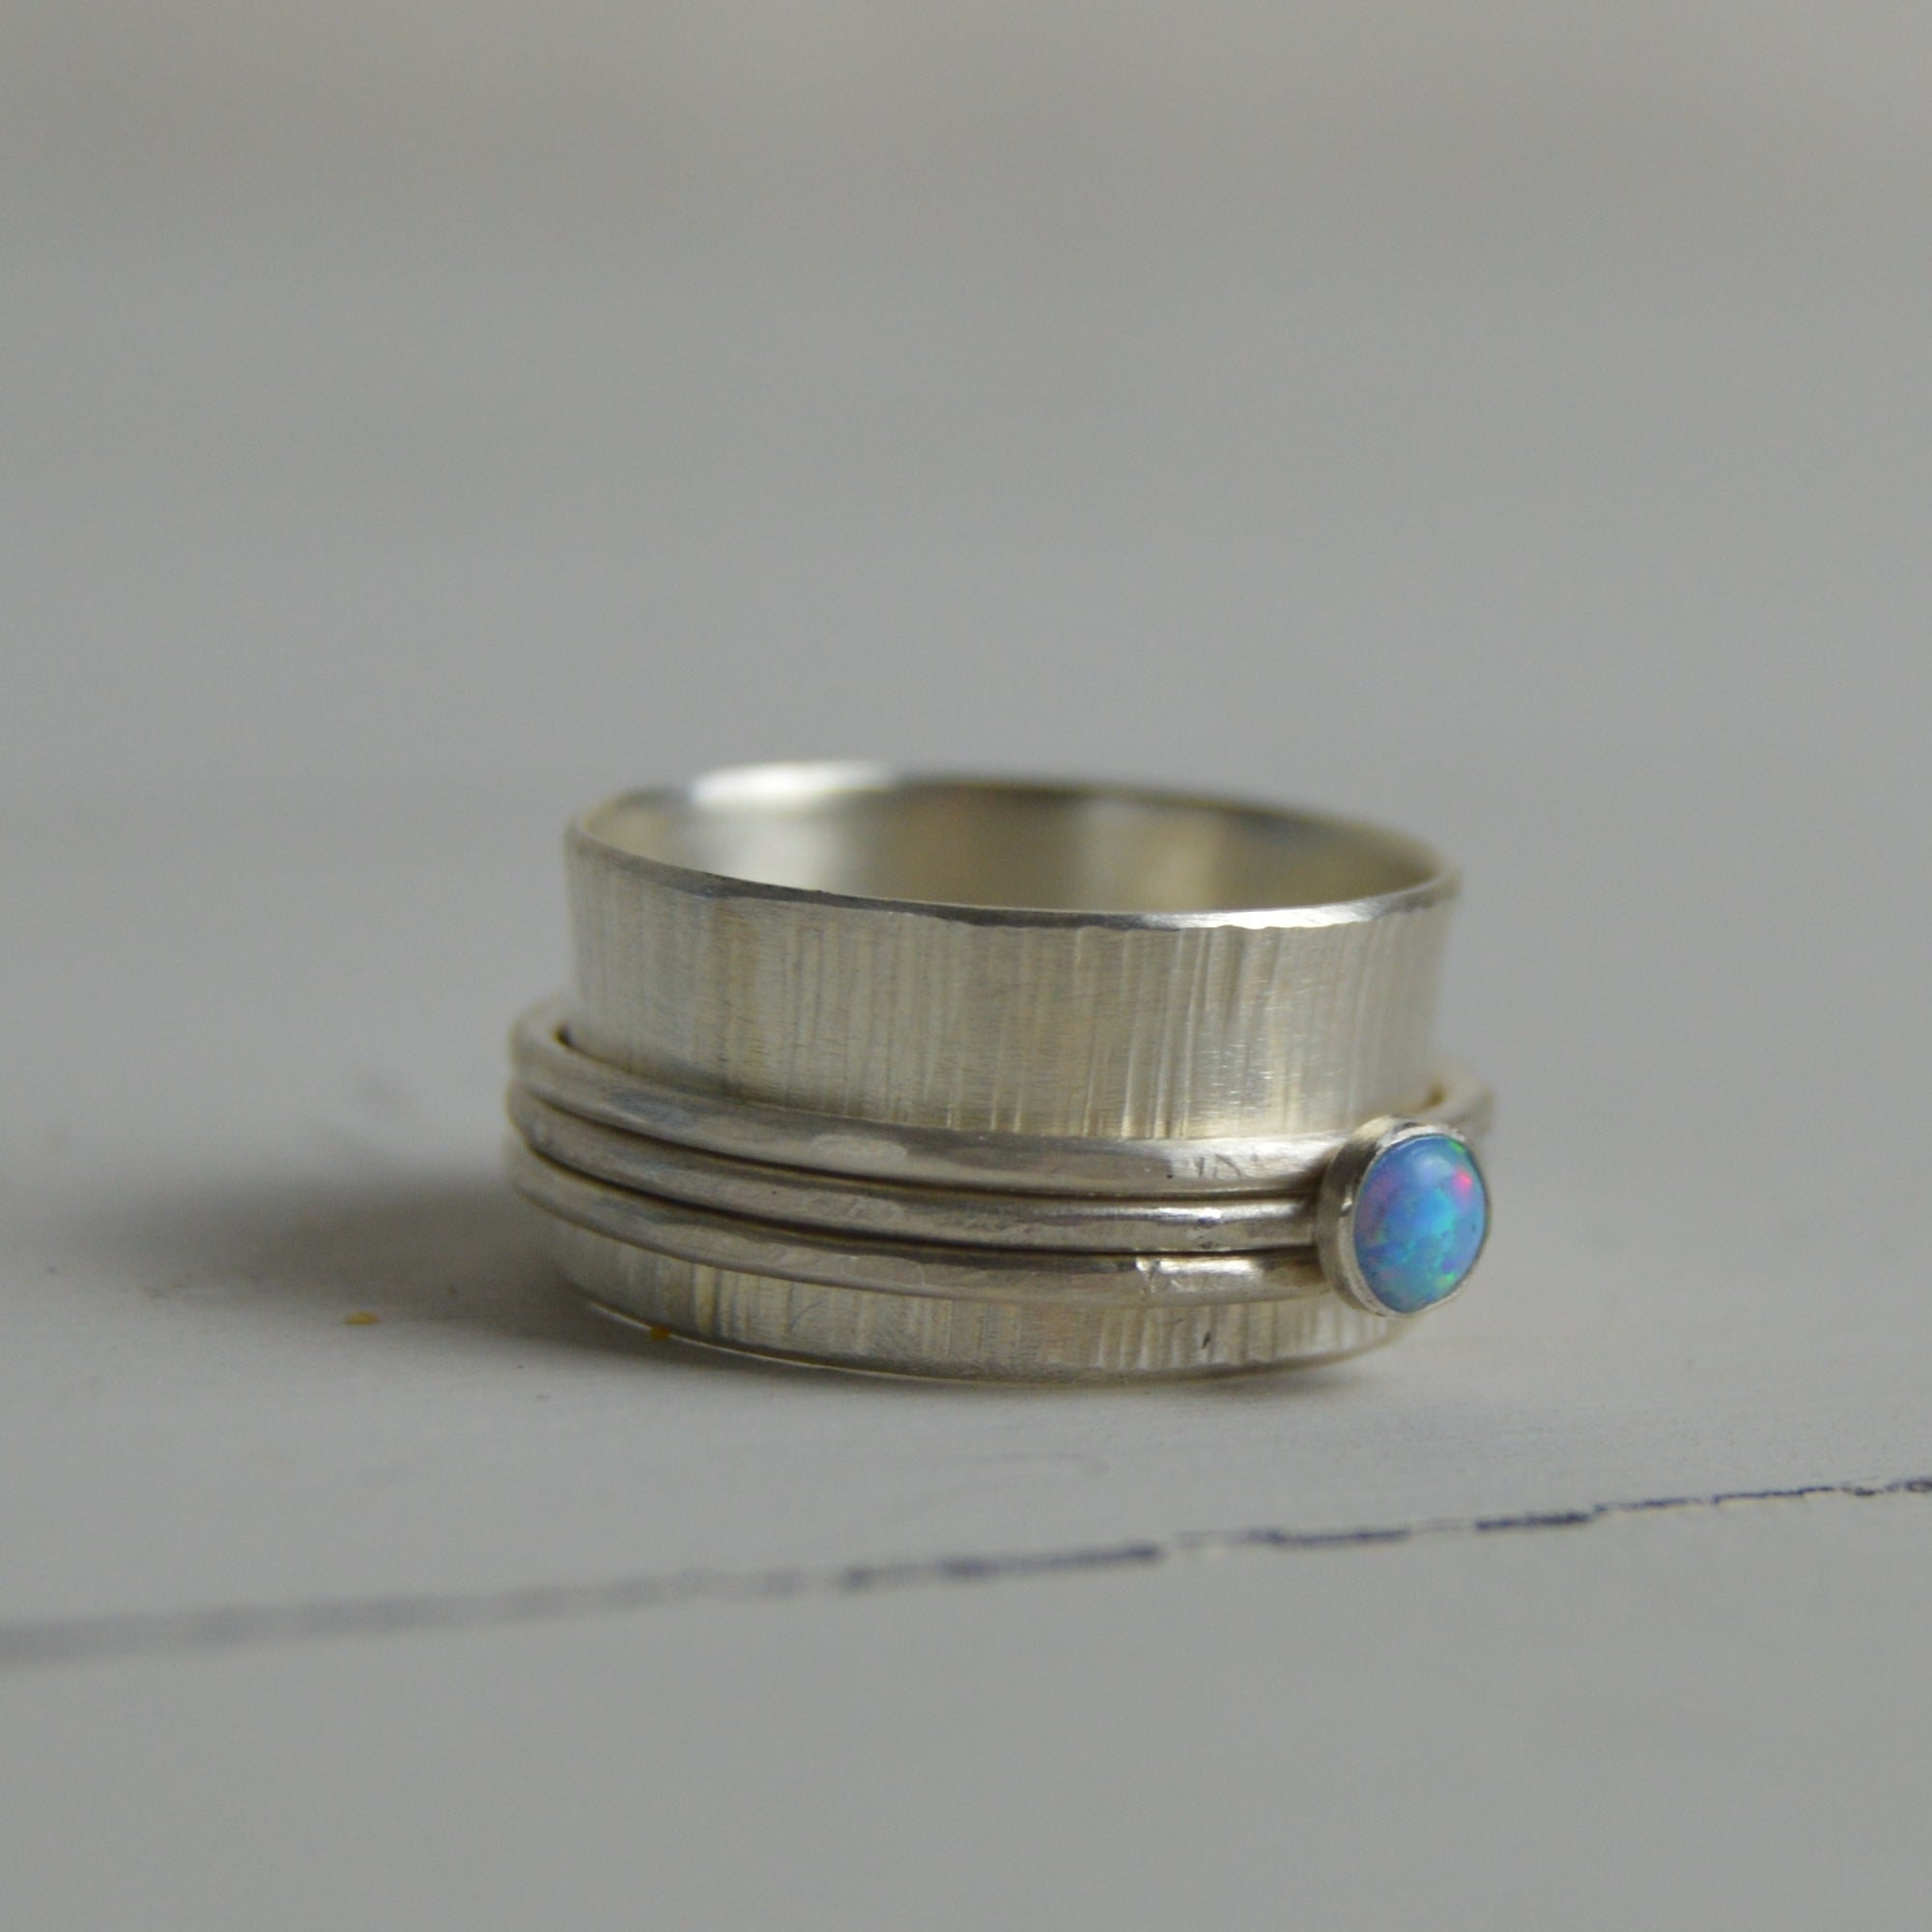 Silver Opal Spinning Ring - The Nancy Smillie Shop - Art, Jewellery & Designer Gifts Glasgow